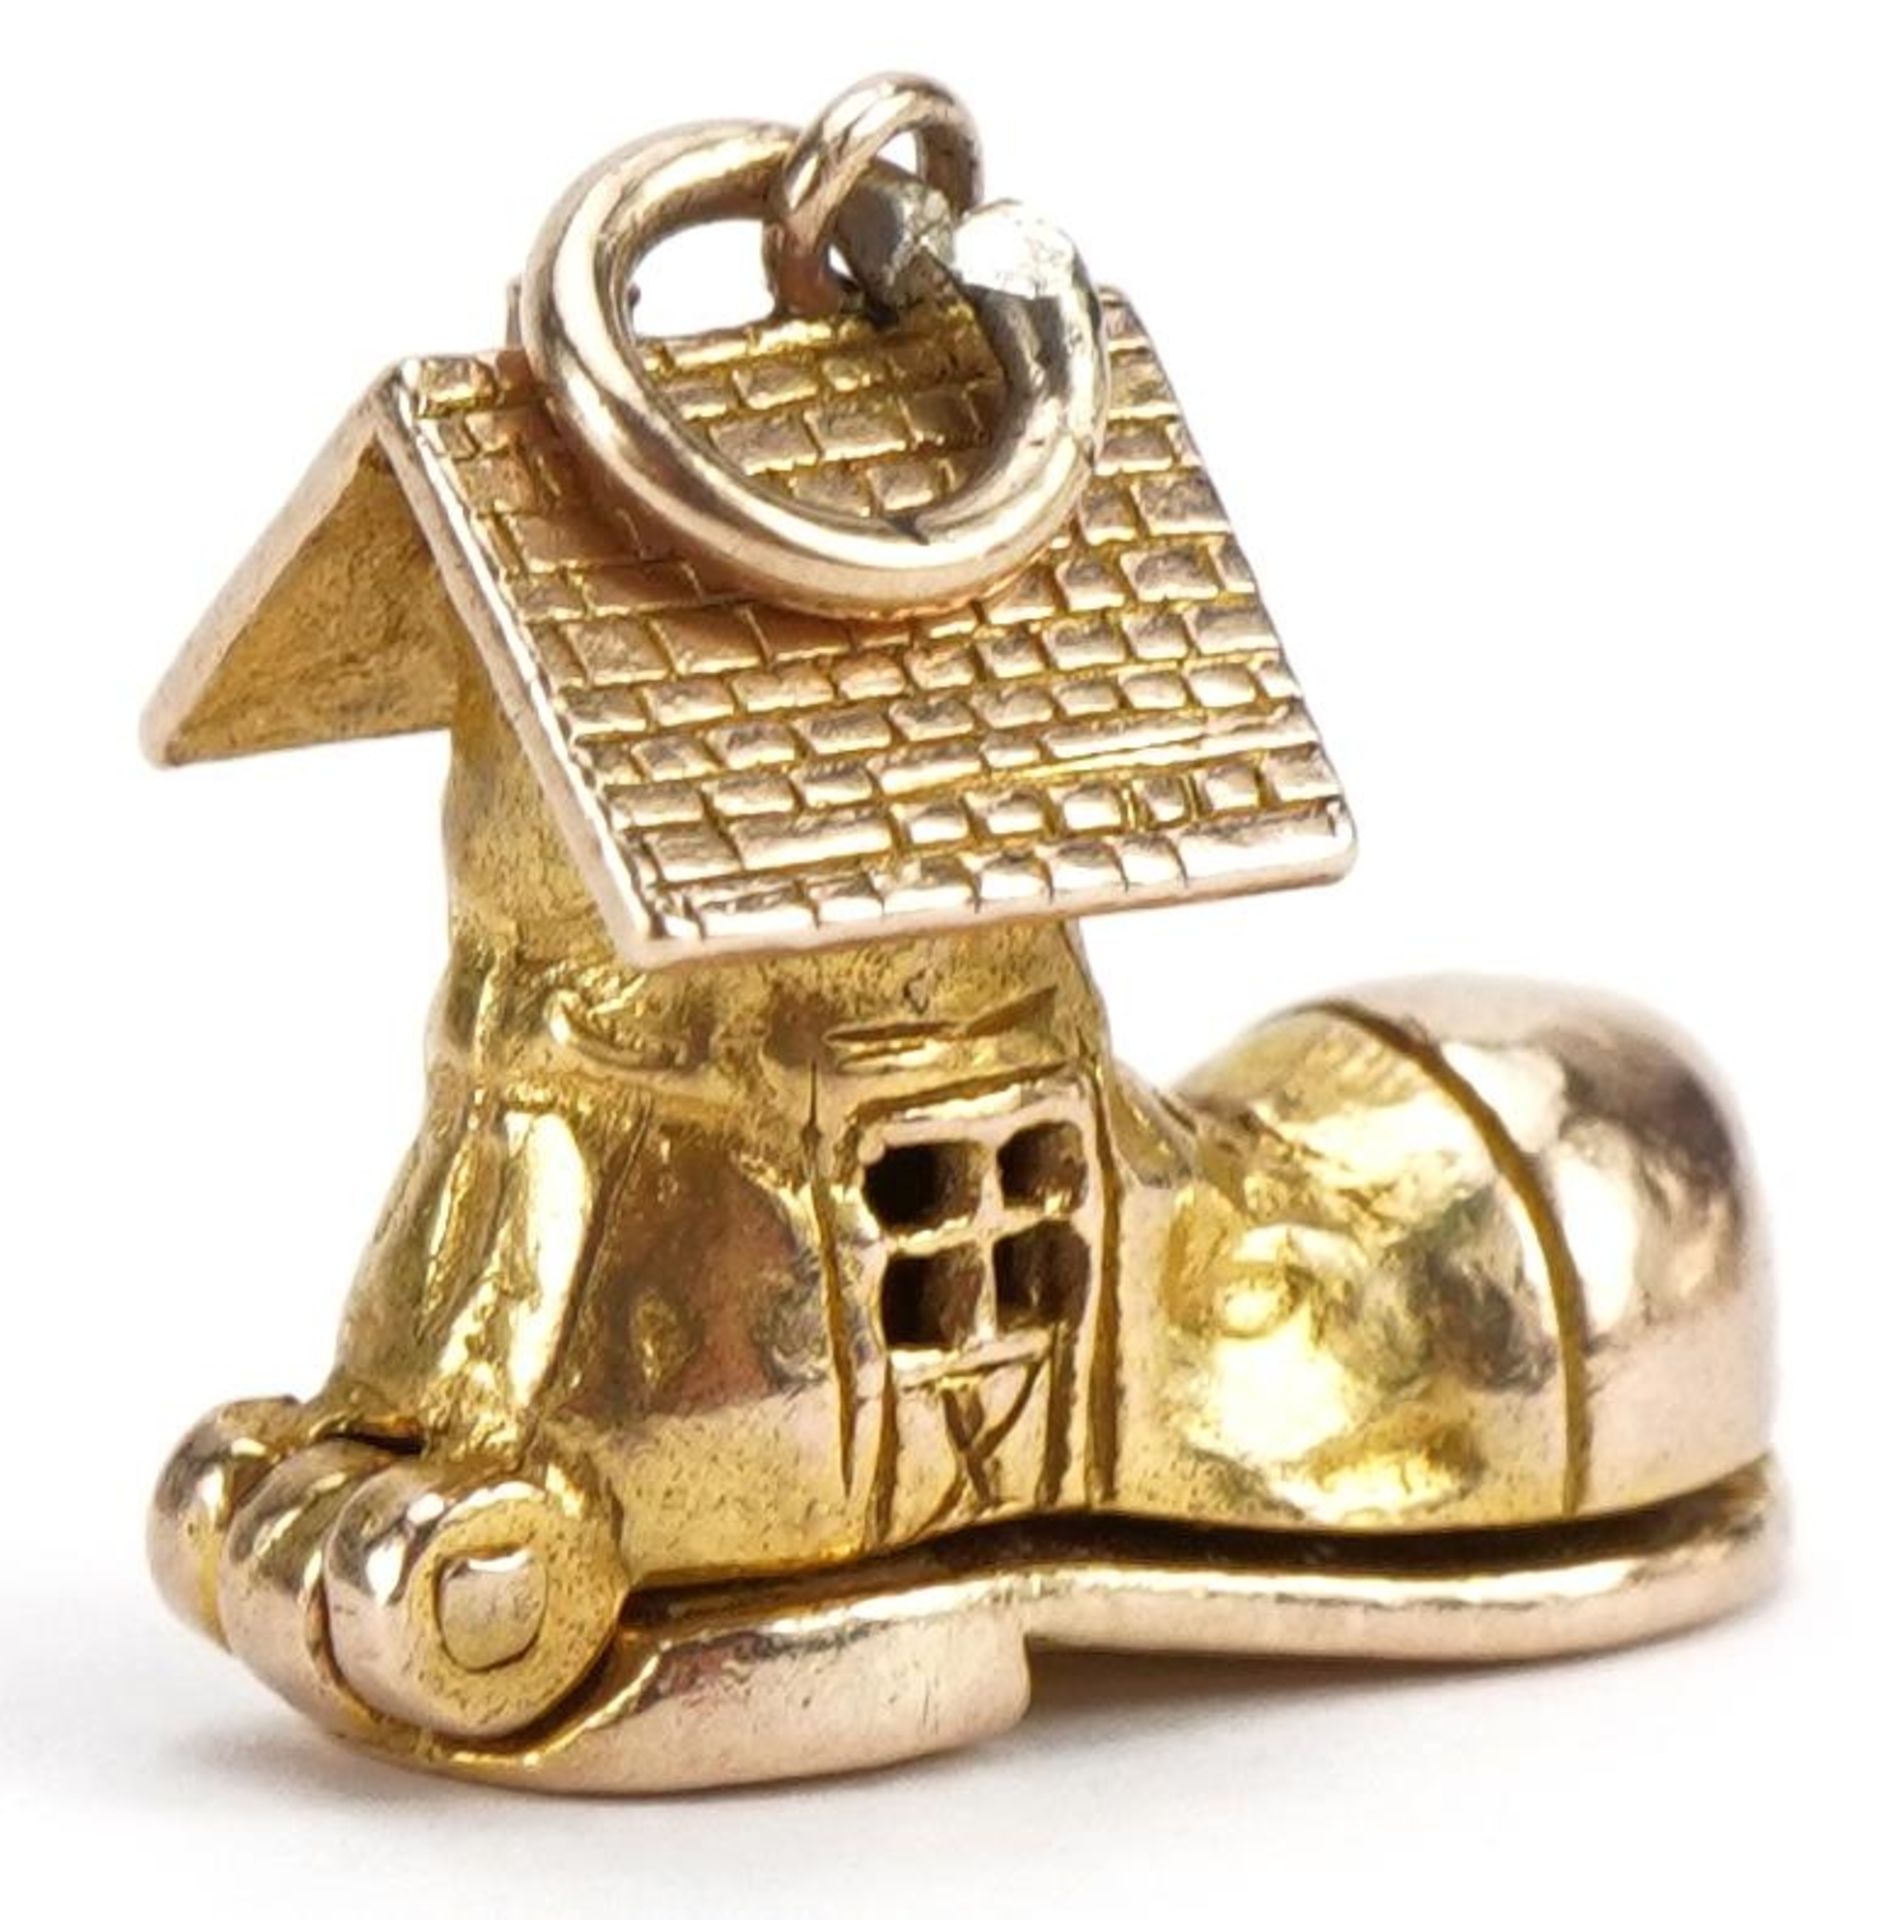 9ct gold shoe charm opening to reveal enamelled figures, 1.5cm high, 3.8g - Image 3 of 5